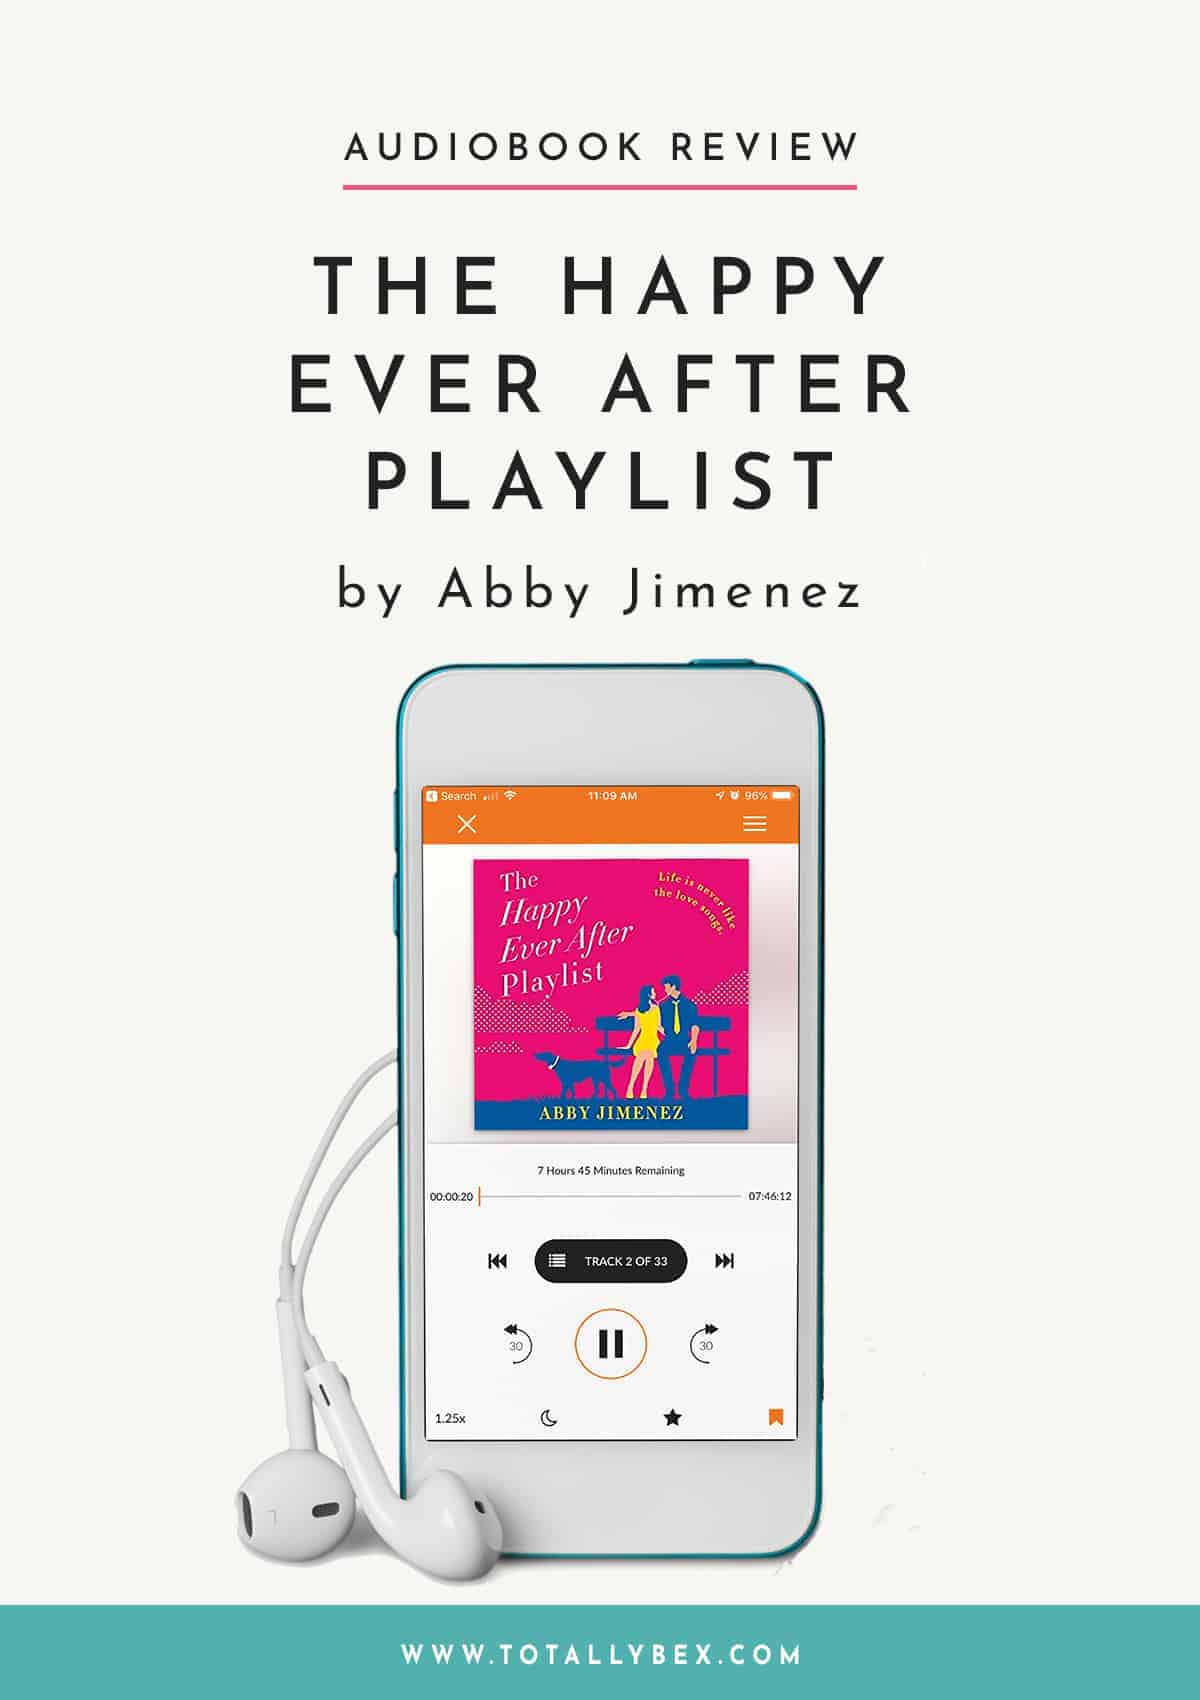 The Happy Ever After Playlist by Abby Jimenez-Audiobook Review